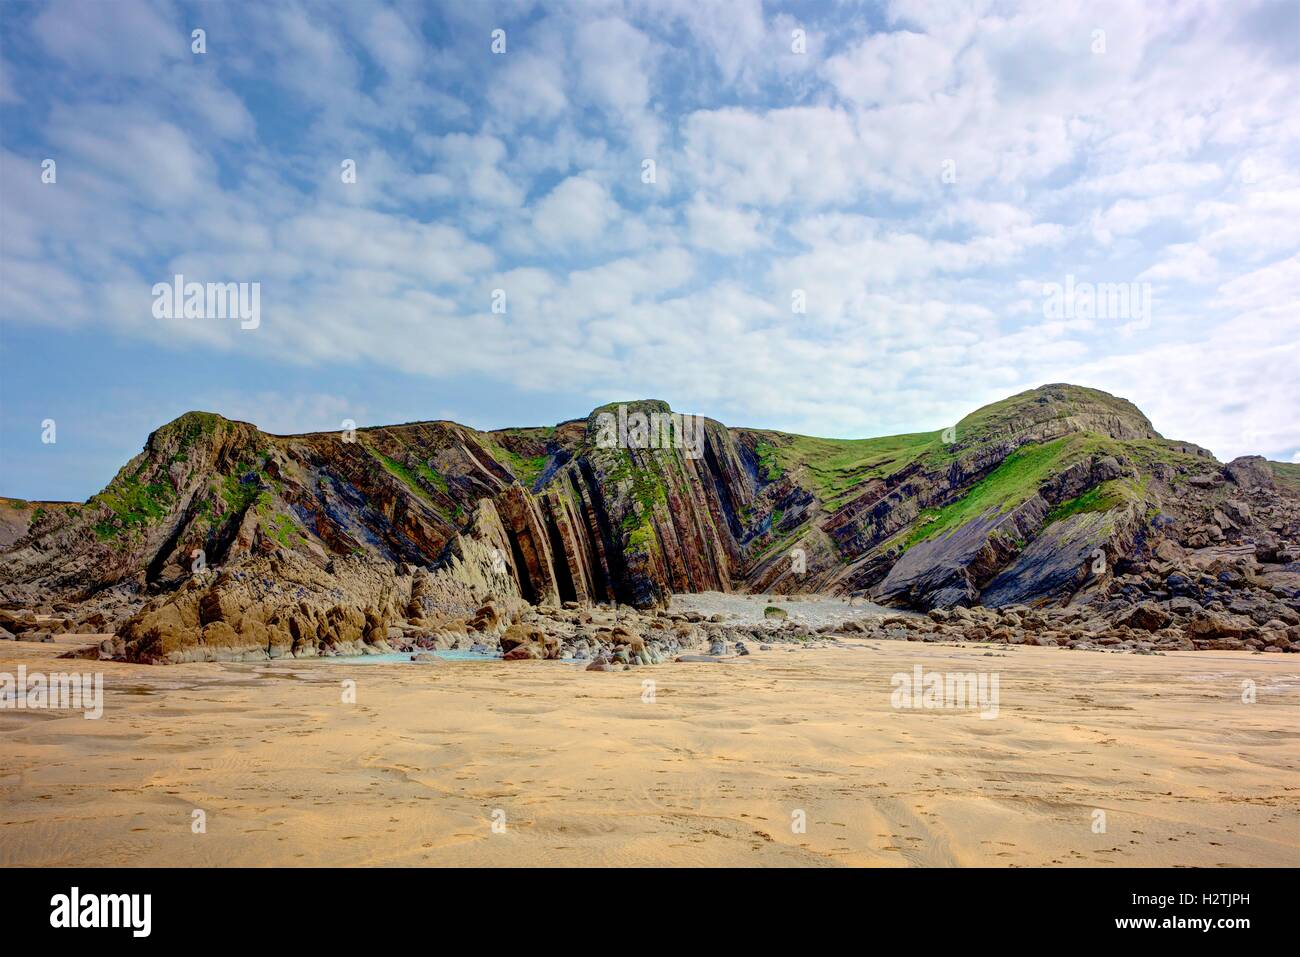 Detail of geological layers in coastal cliffs near Bude, England. The landscape features yellow sand, grass, rock and blue sky. Stock Photo